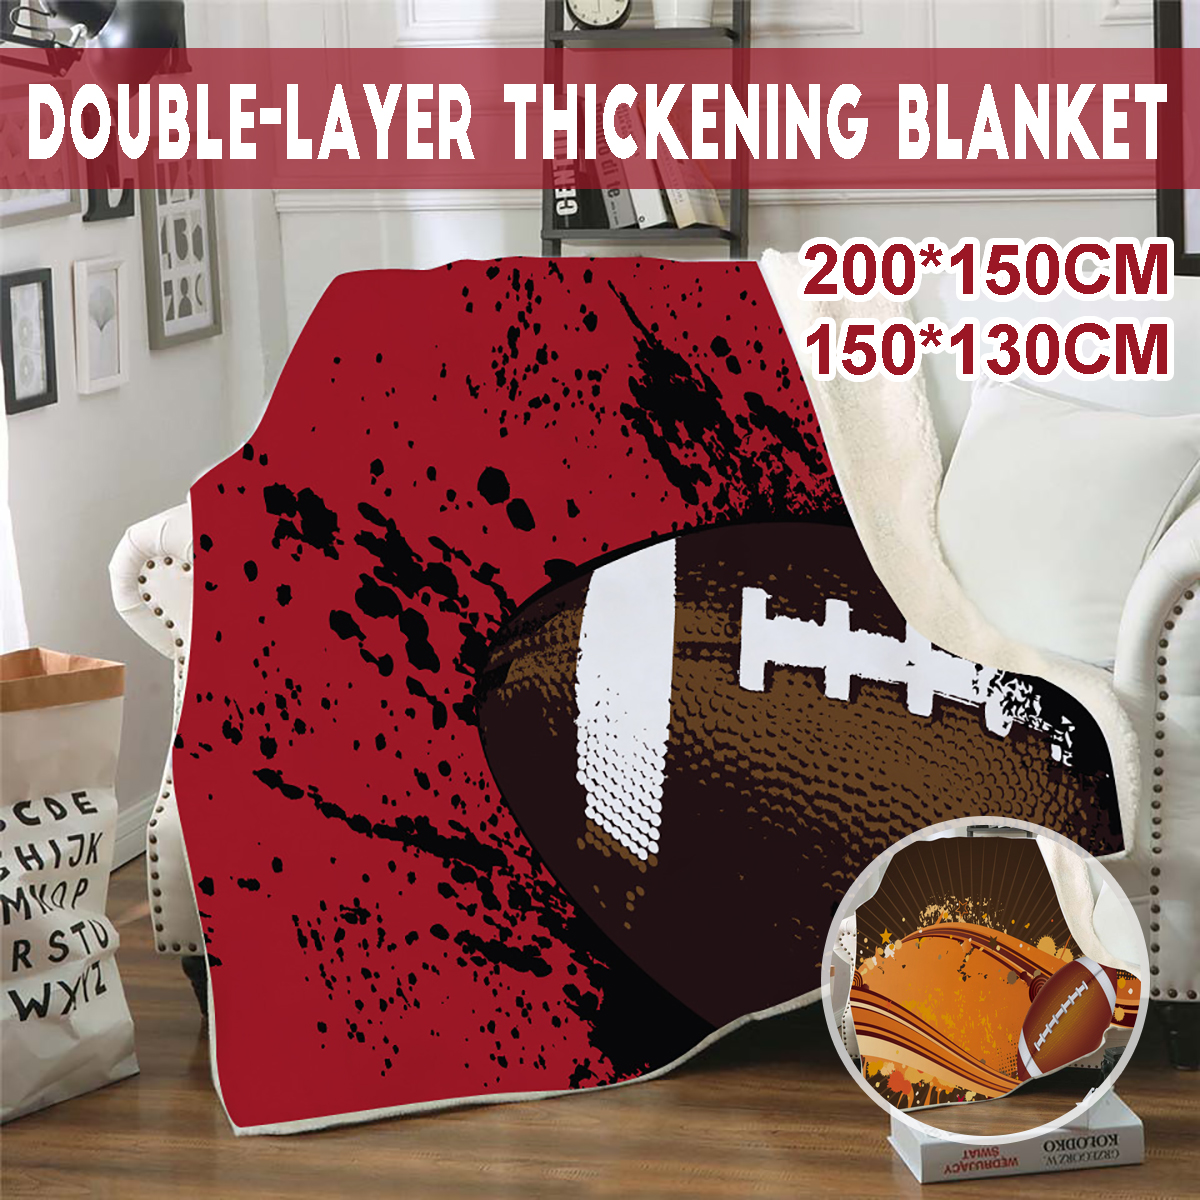 Double-Thicken-Blanket-3D-Digital-Printing-Blanket-Fugby-Series-Sofa-Cover-Rugby-Cartoon-Bedding-1924765-1